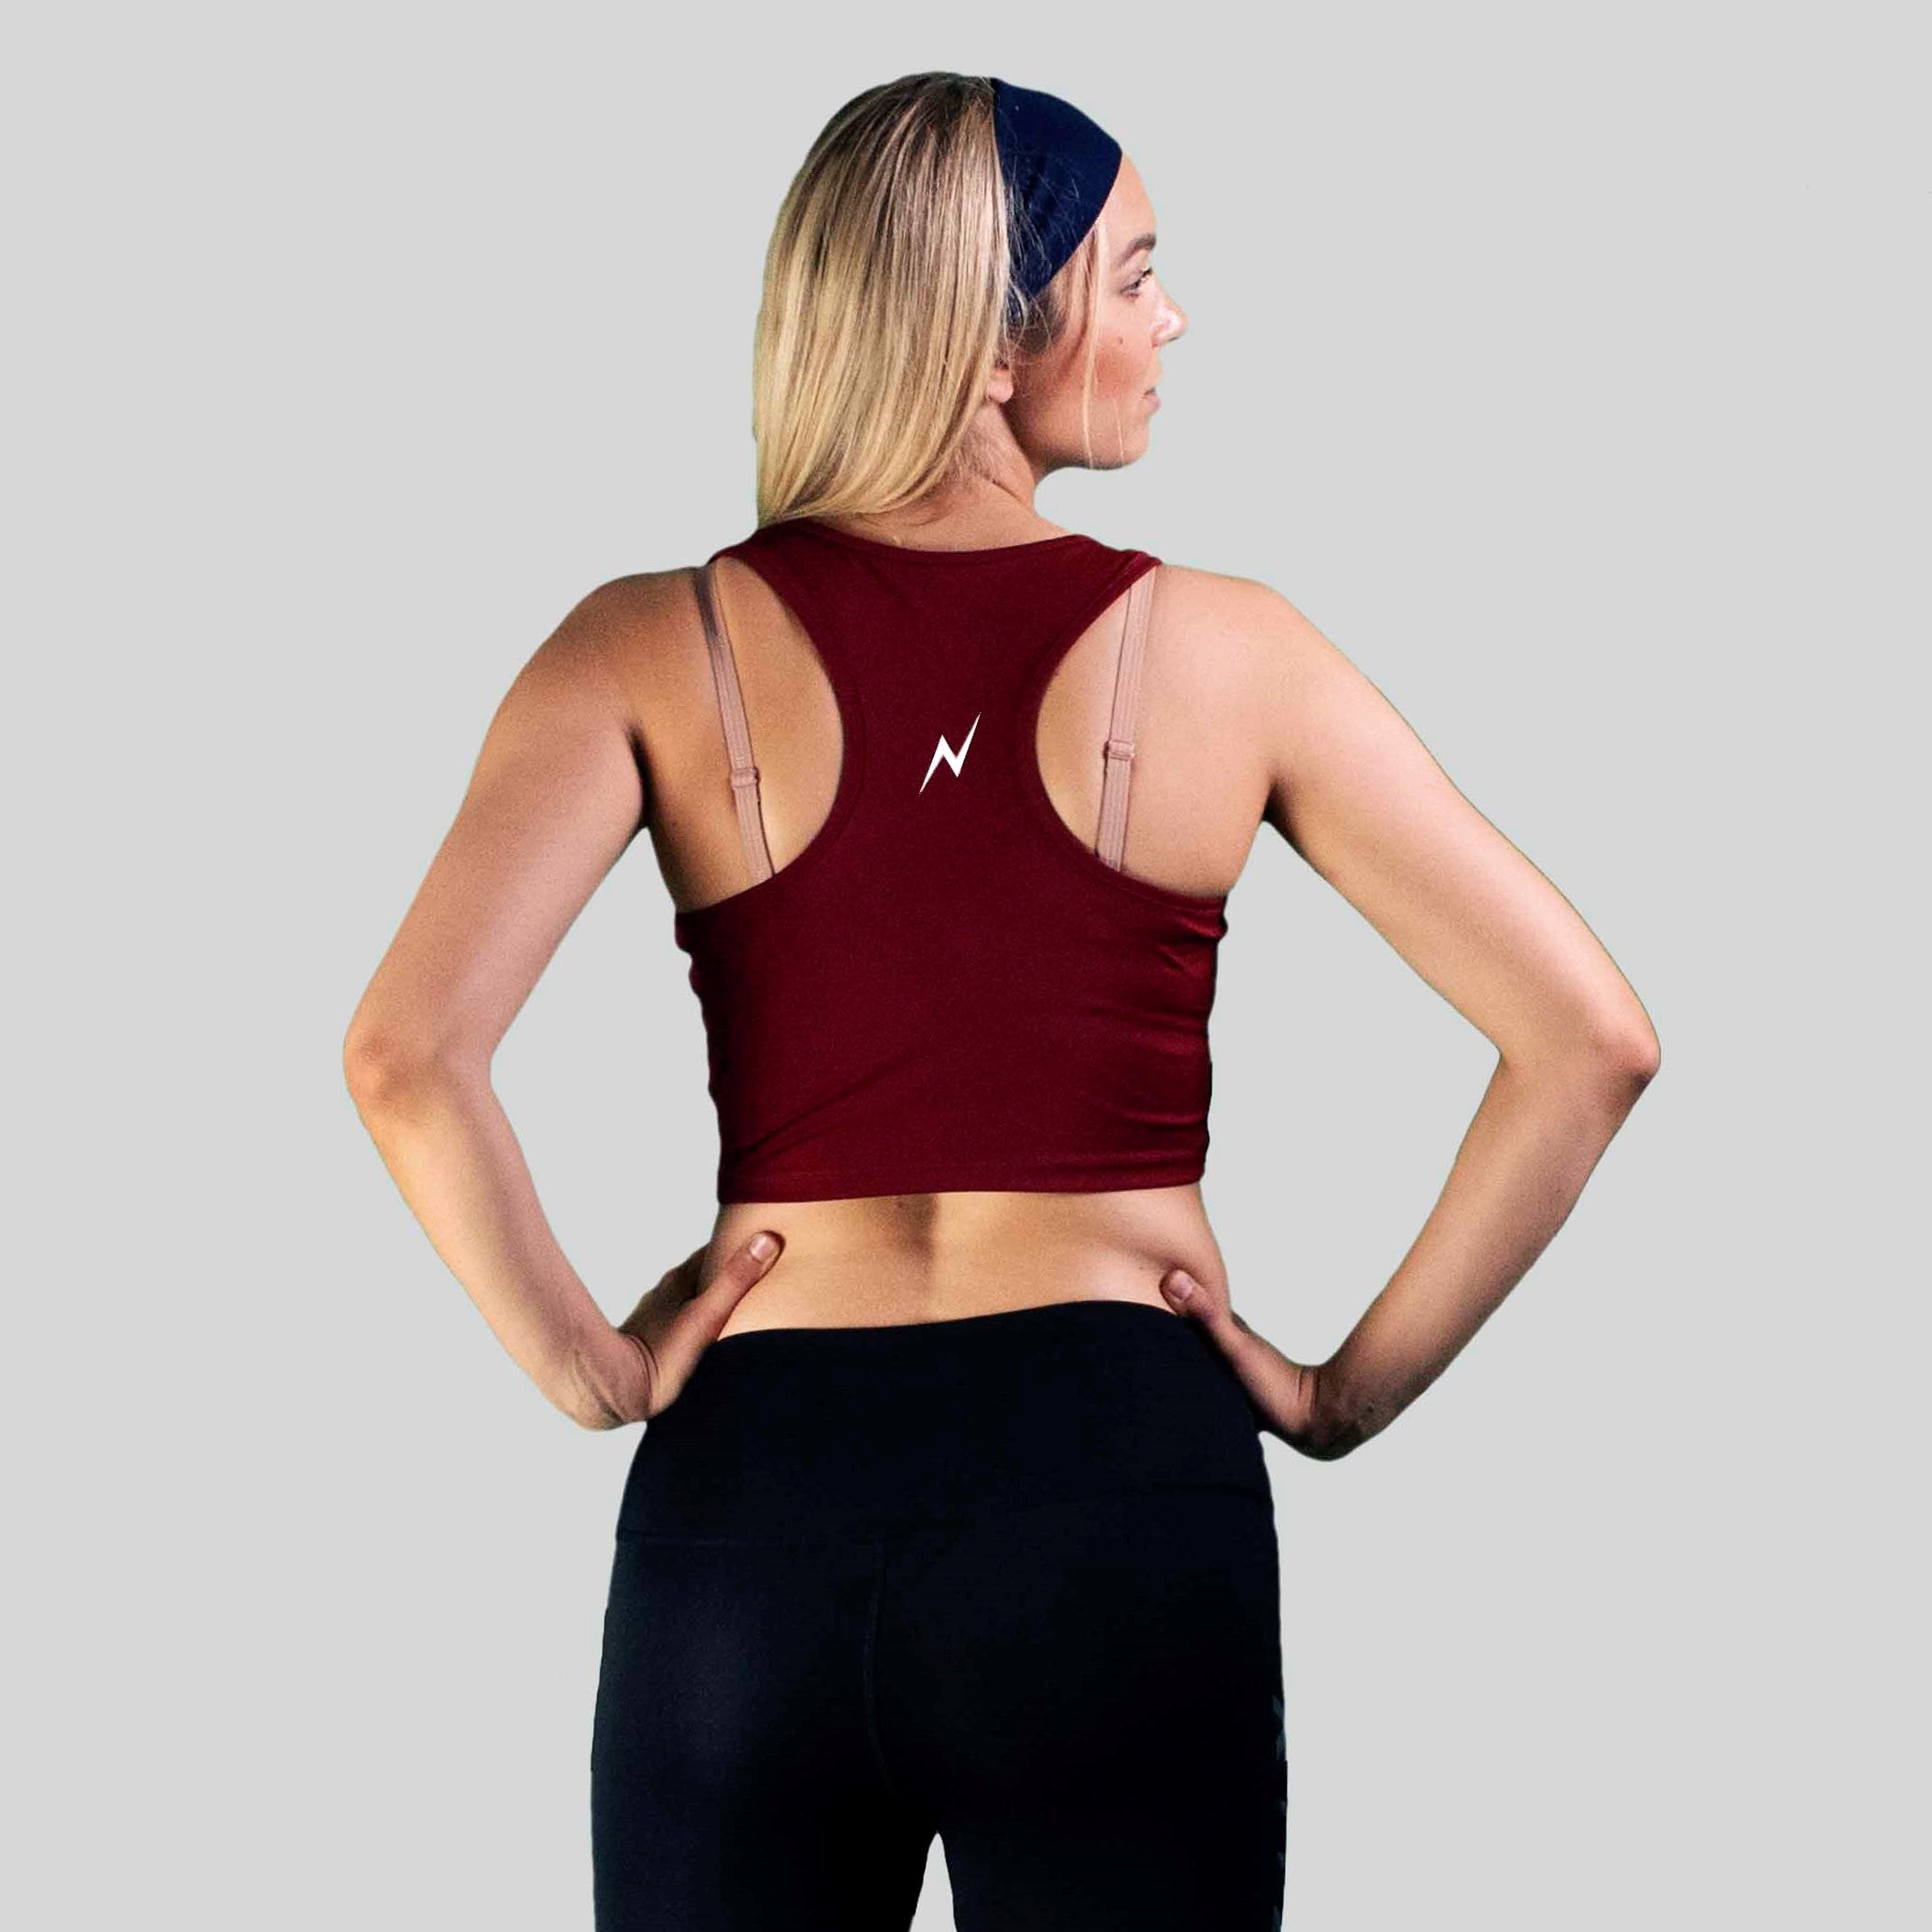 Kwench Womens Gymshark Yoga workout fitness top Tshirt